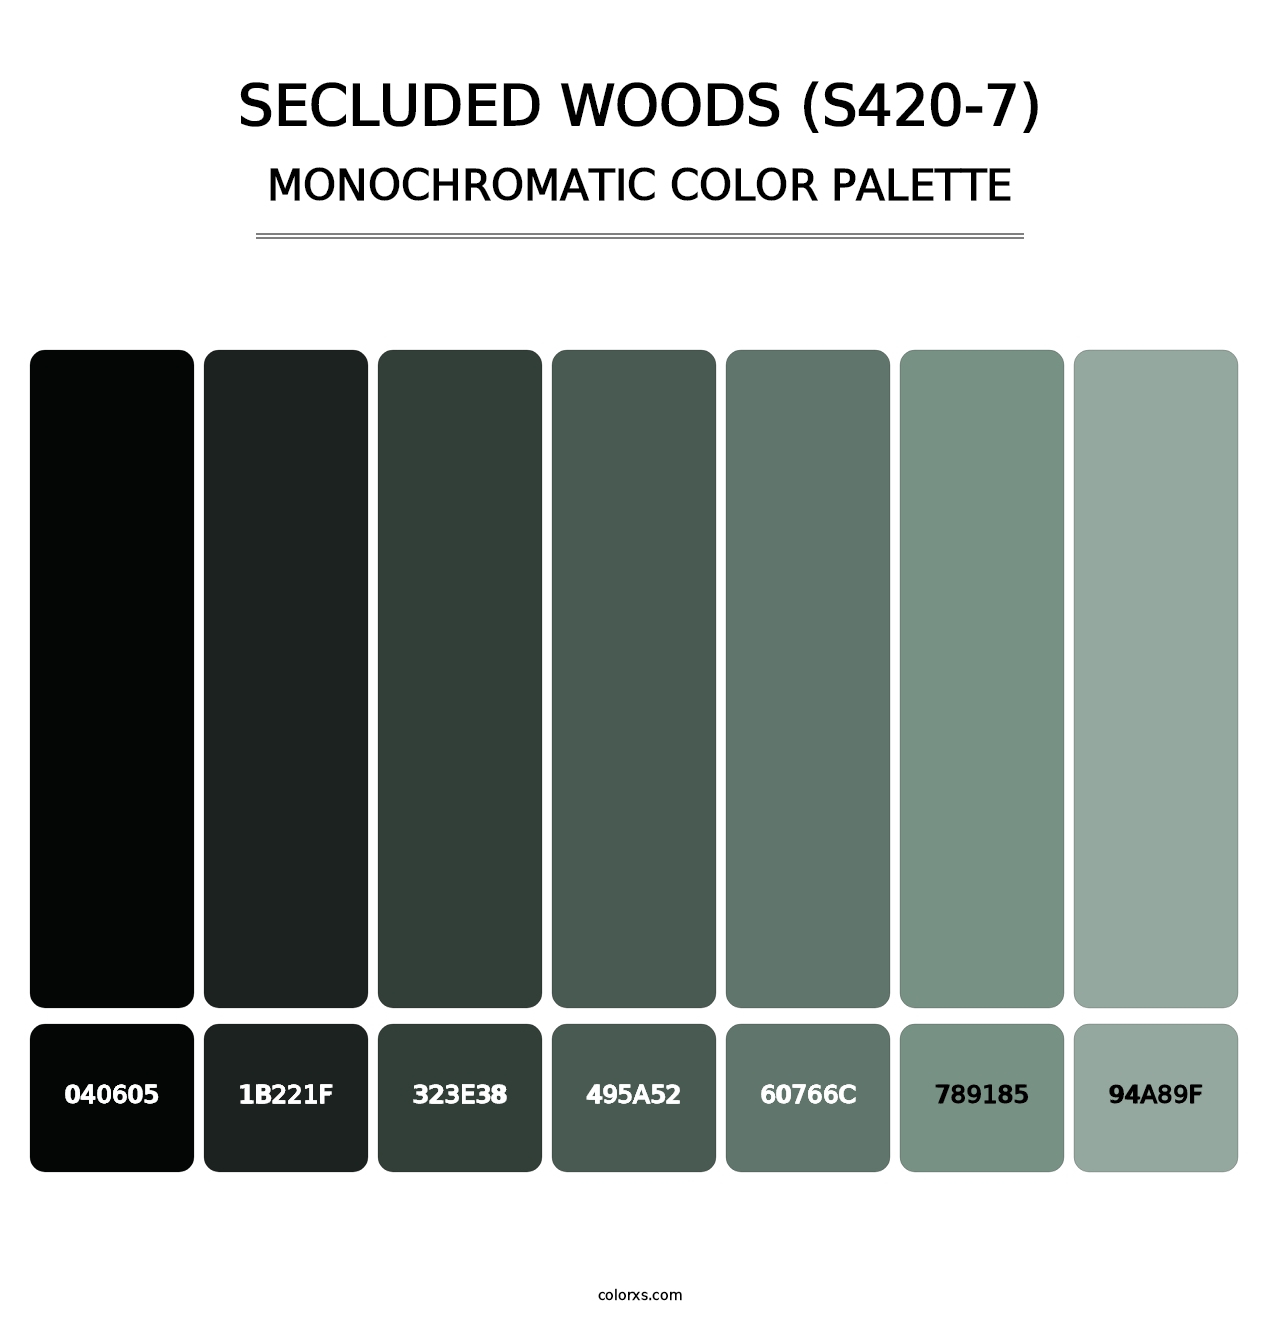 Secluded Woods (S420-7) - Monochromatic Color Palette